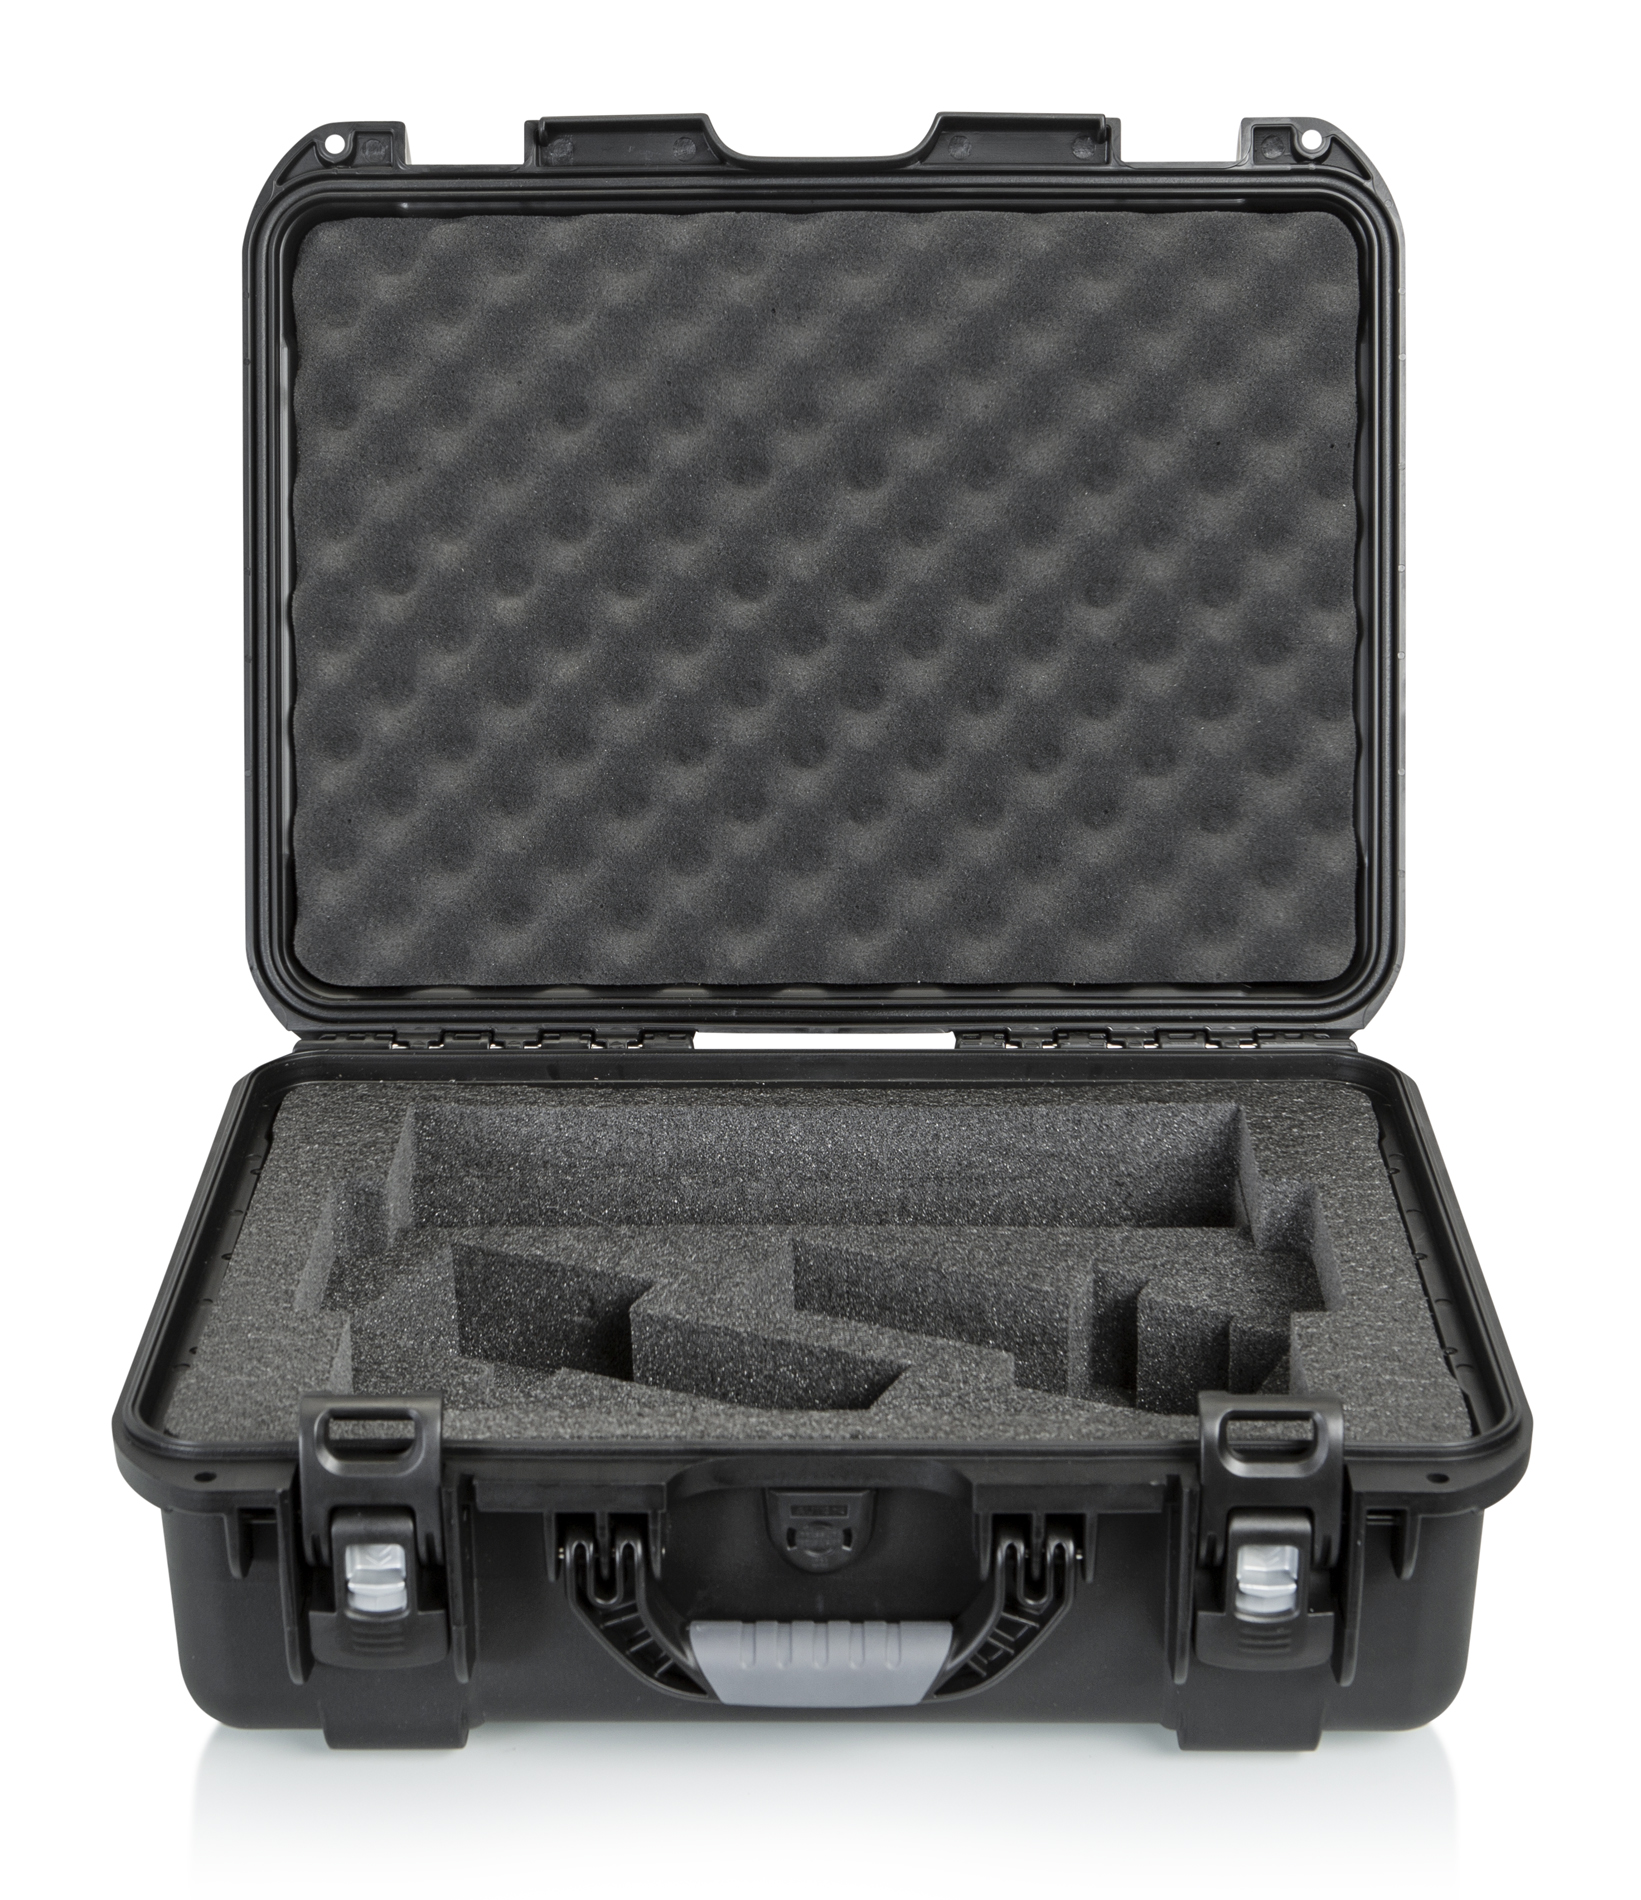 Titan Case For RODEcaster Pro & Two Mics-GWP-TITANRODECASTER2